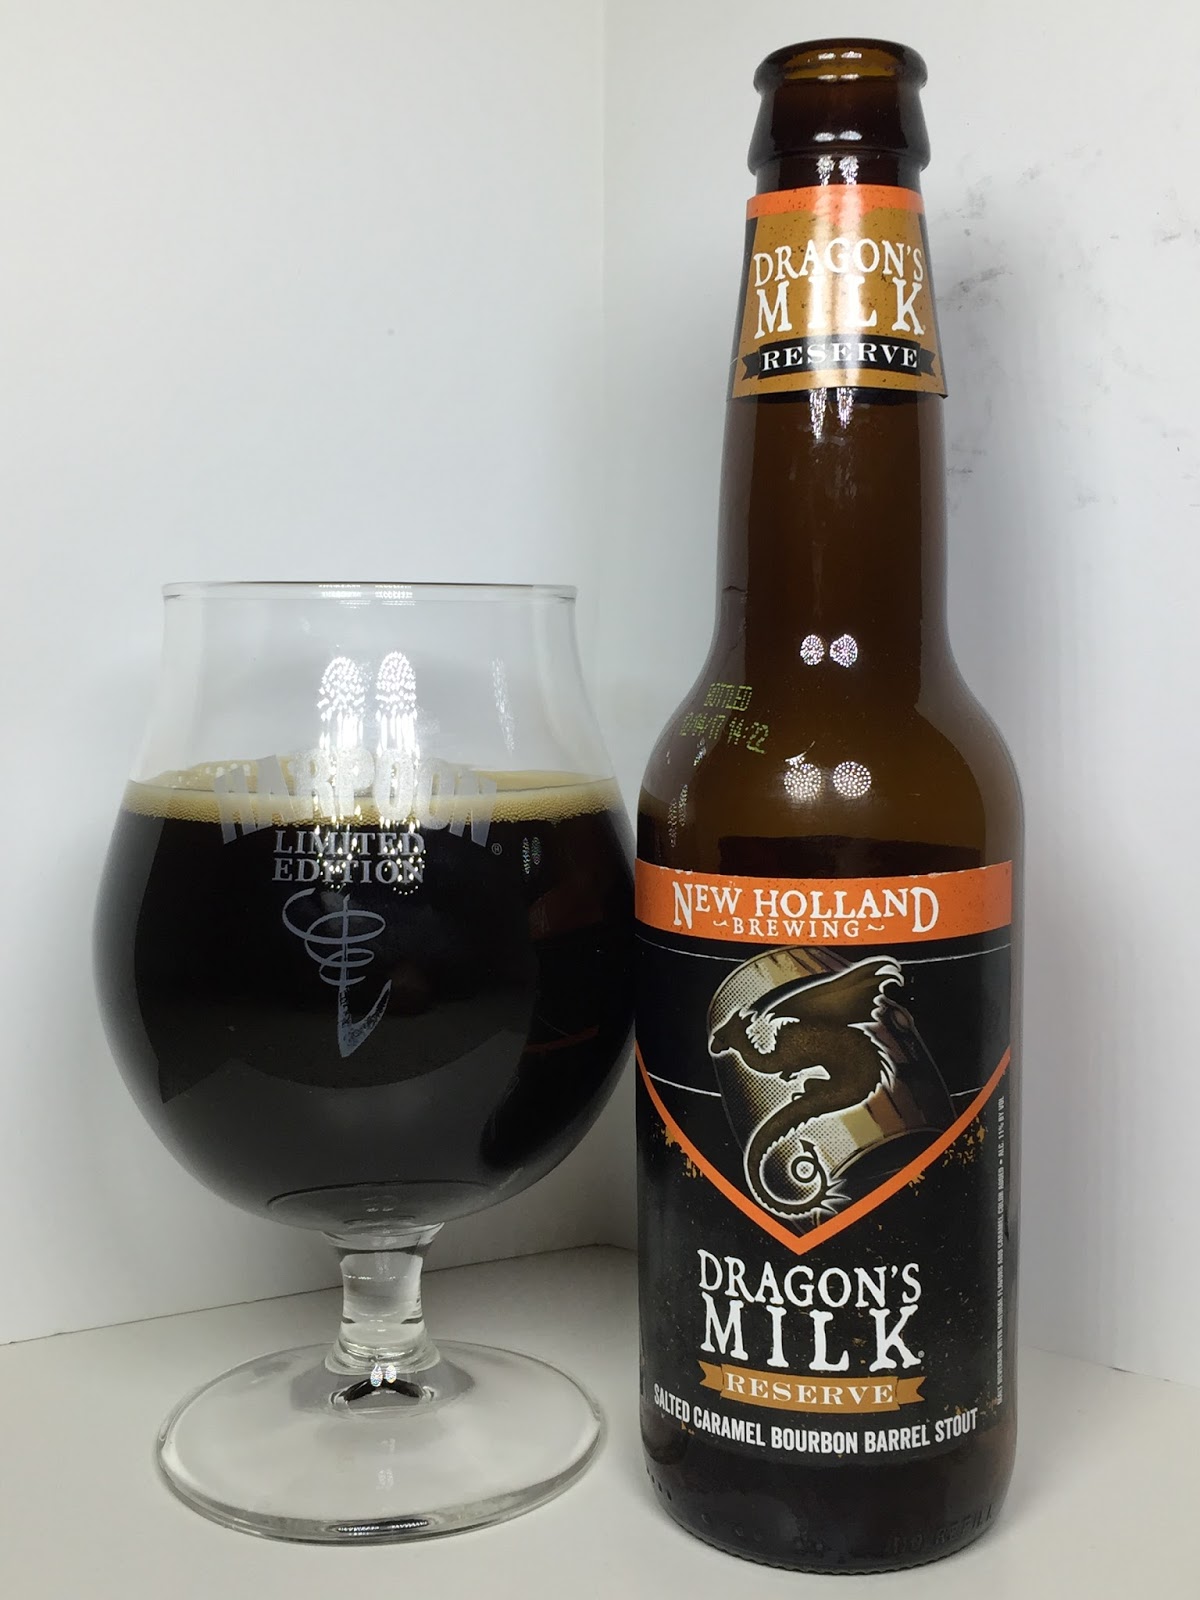 Threw Red Butter S Beer Reviews New Holland Dragon S Milk Reserve Salted Caramel